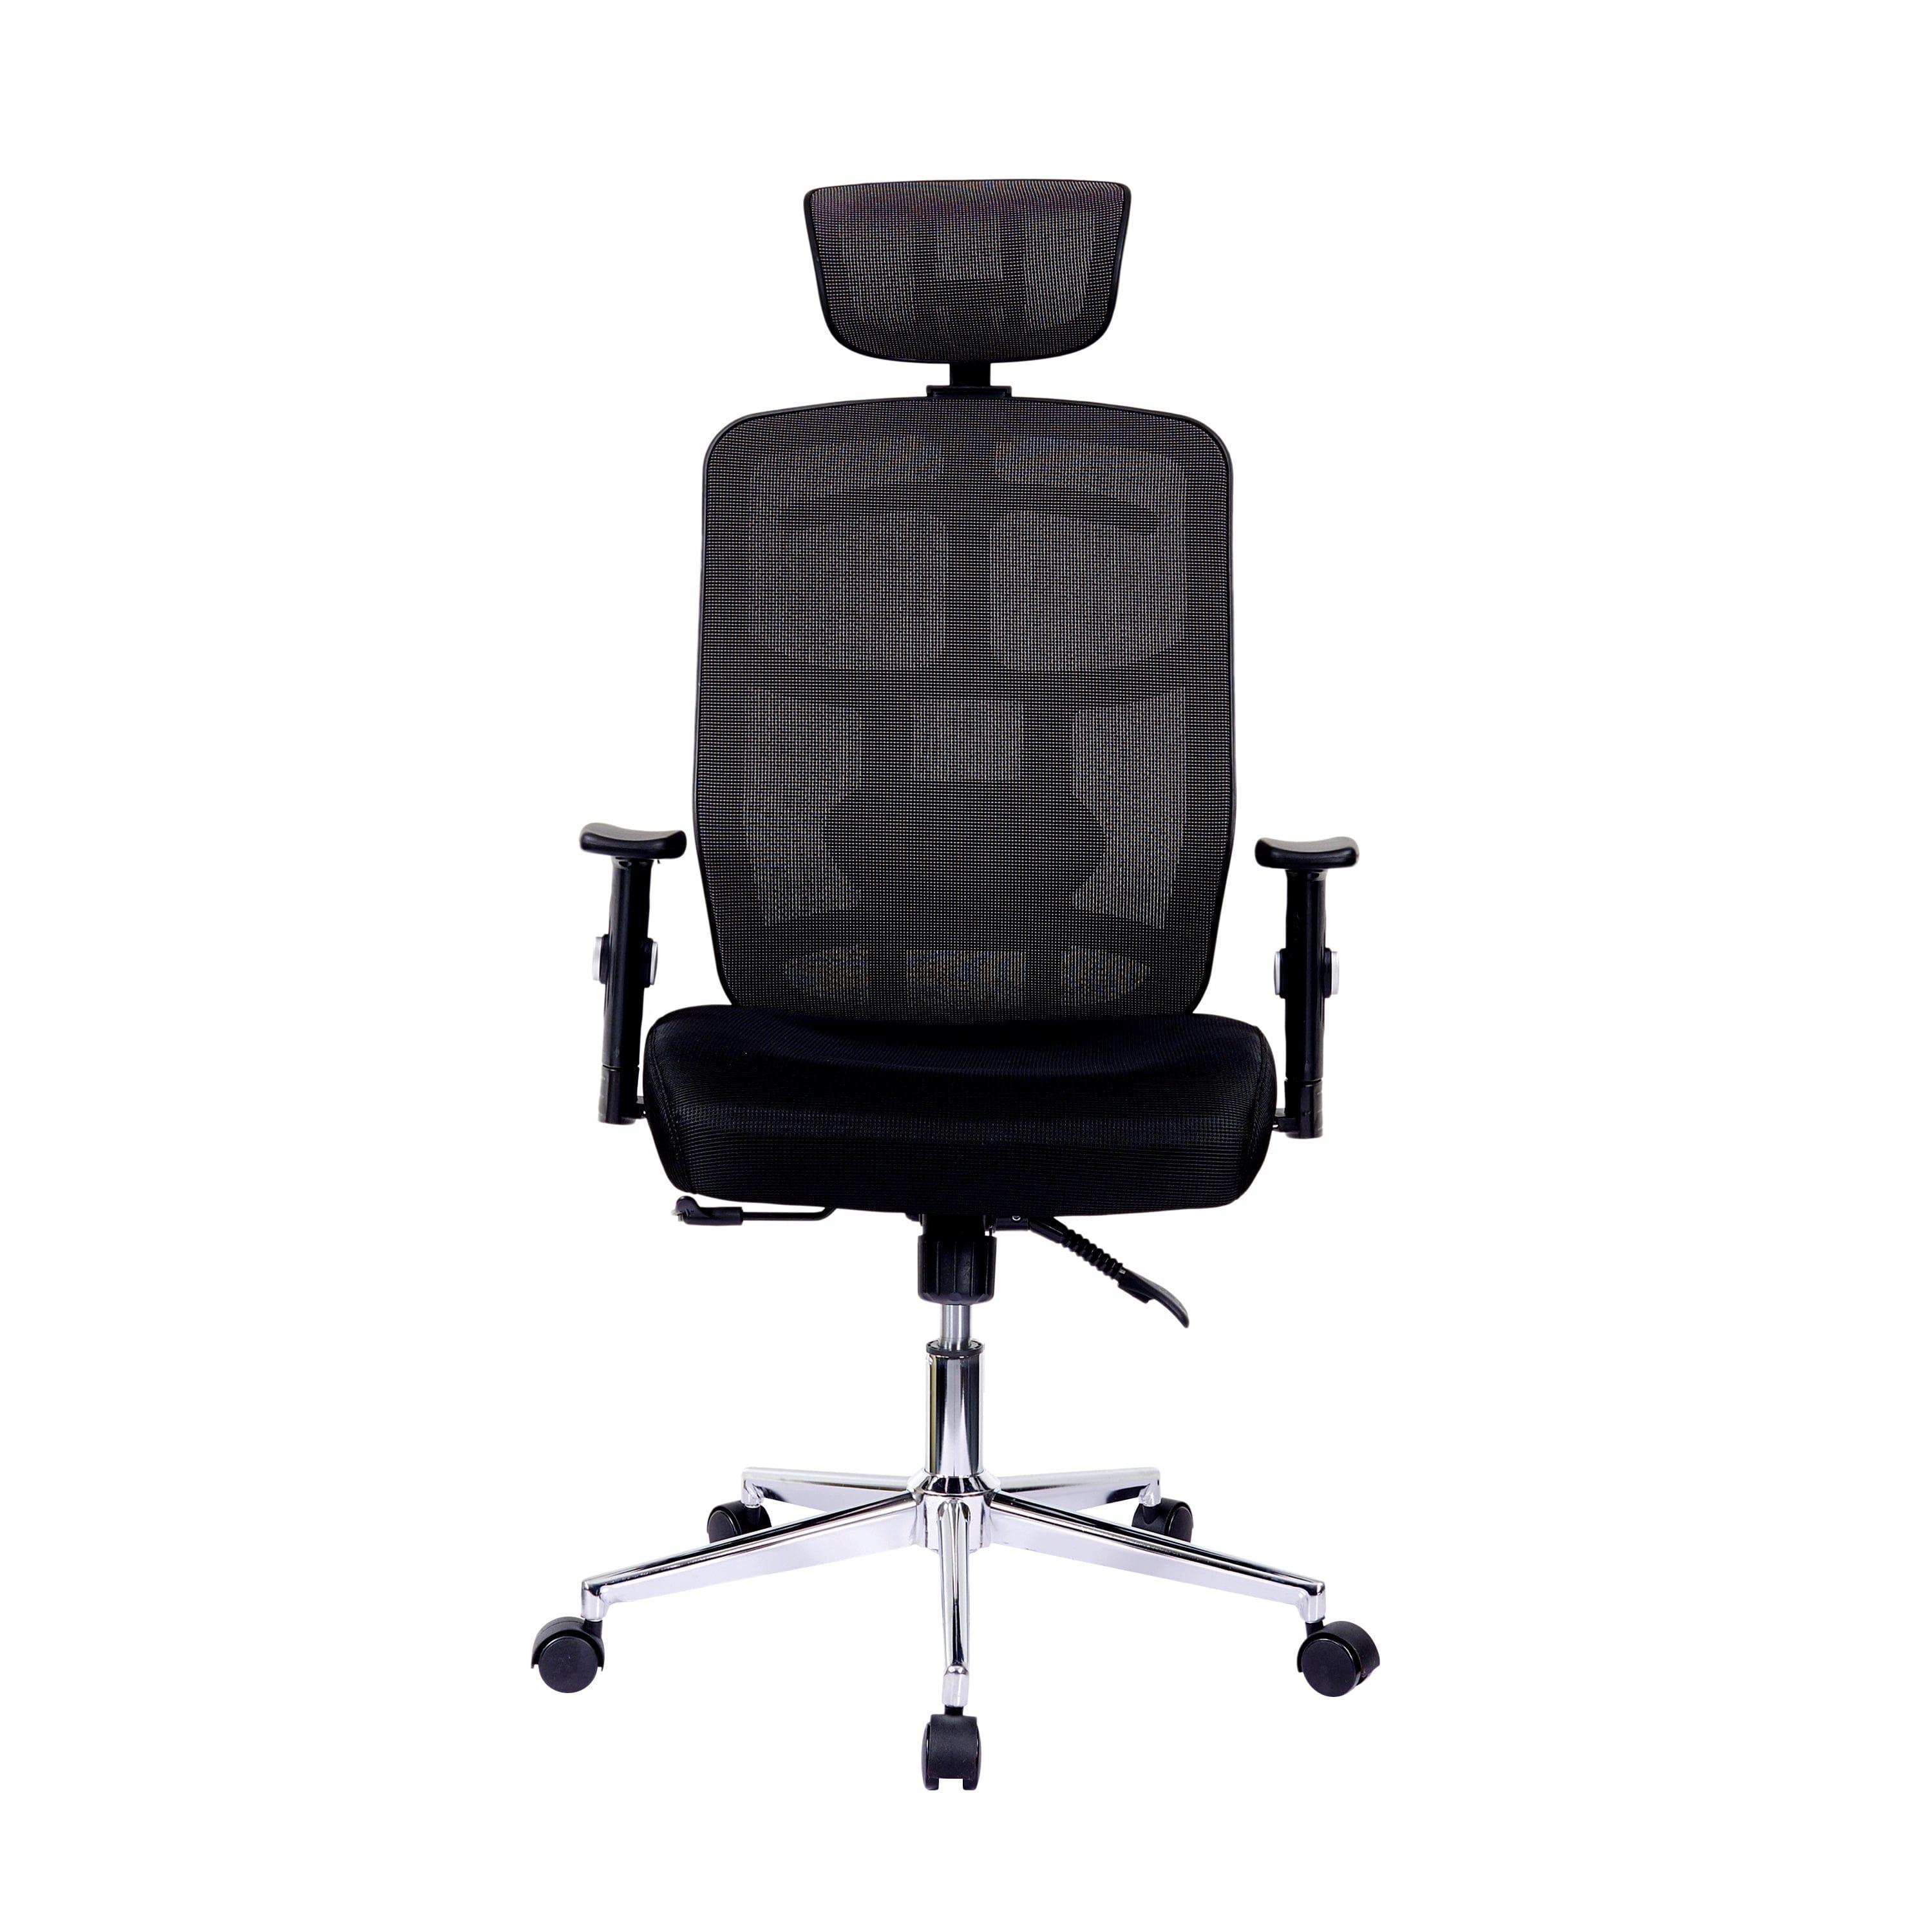 Shop Techni Mobili High Back Executive Mesh Office Chair with Arms, Lumbar Support and Chrome Base, Black Mademoiselle Home Decor